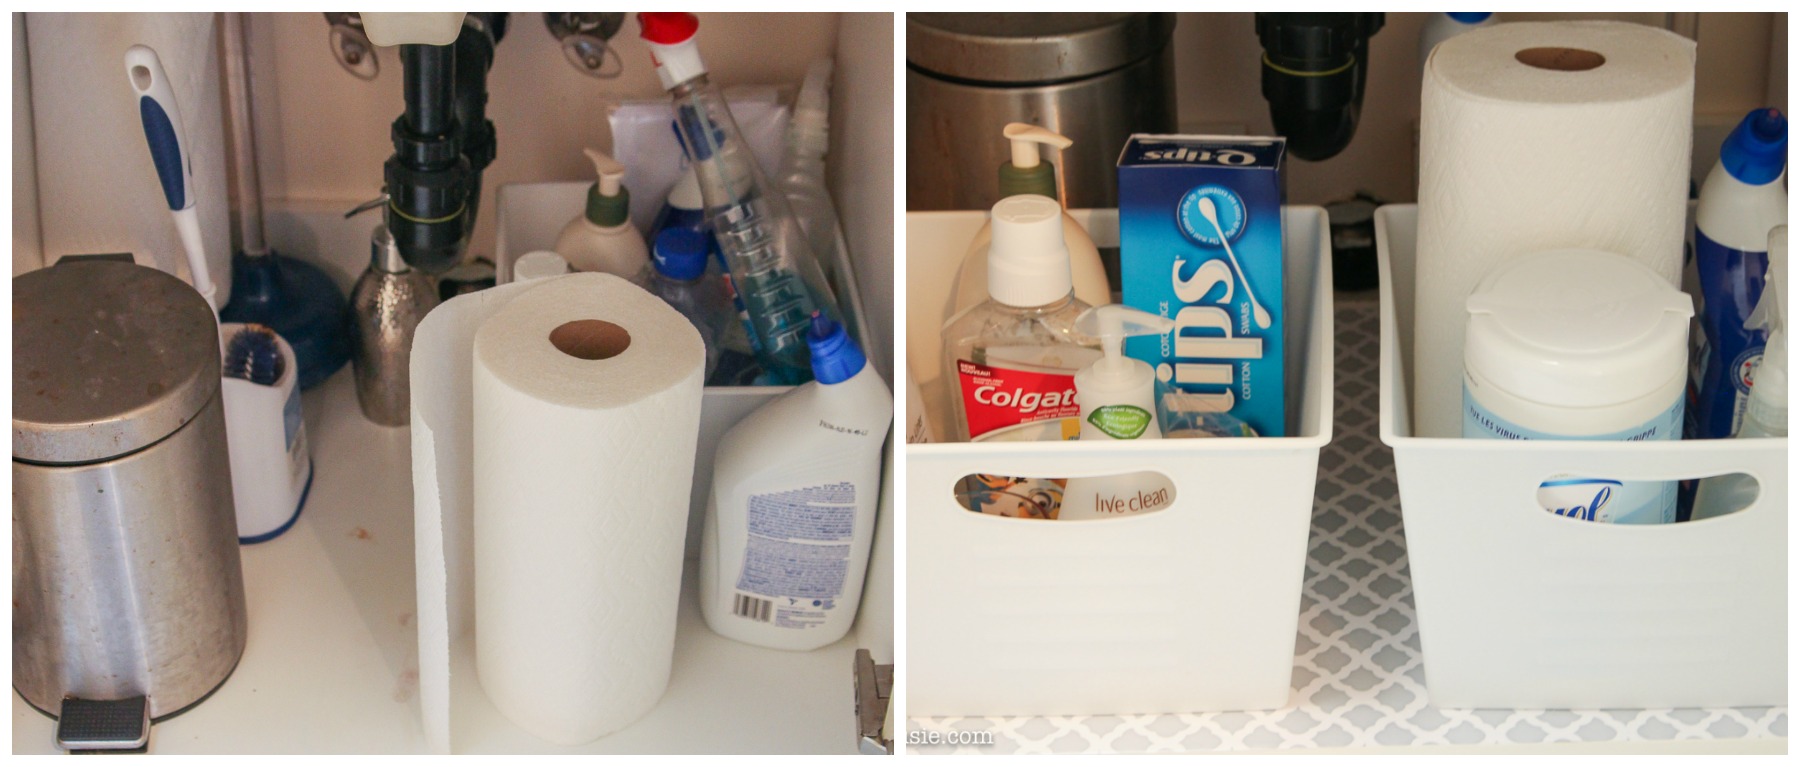 https://www.thehappyhousie.com/wp-content/uploads/2017/02/How-to-Organize-Your-Bathroom-our-Before-and-Afters-boys-under-sink-area.jpg